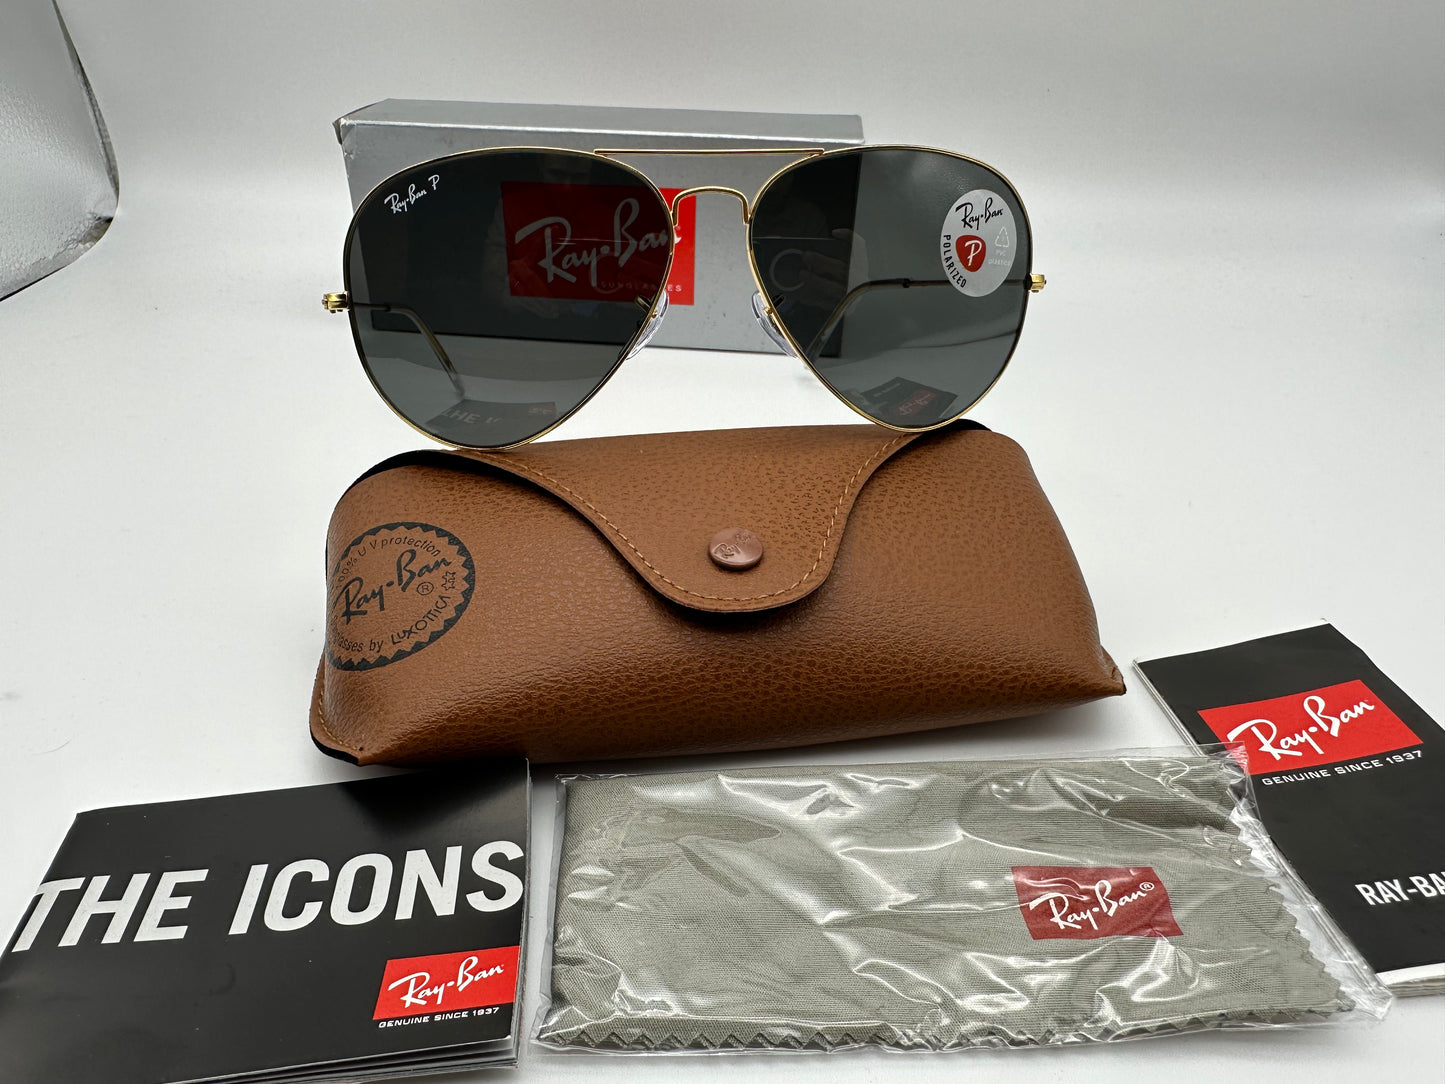 Ray Ban RB3025 Aviator 62mm Large Metal Legend Gold Black Polarized lenses Italy